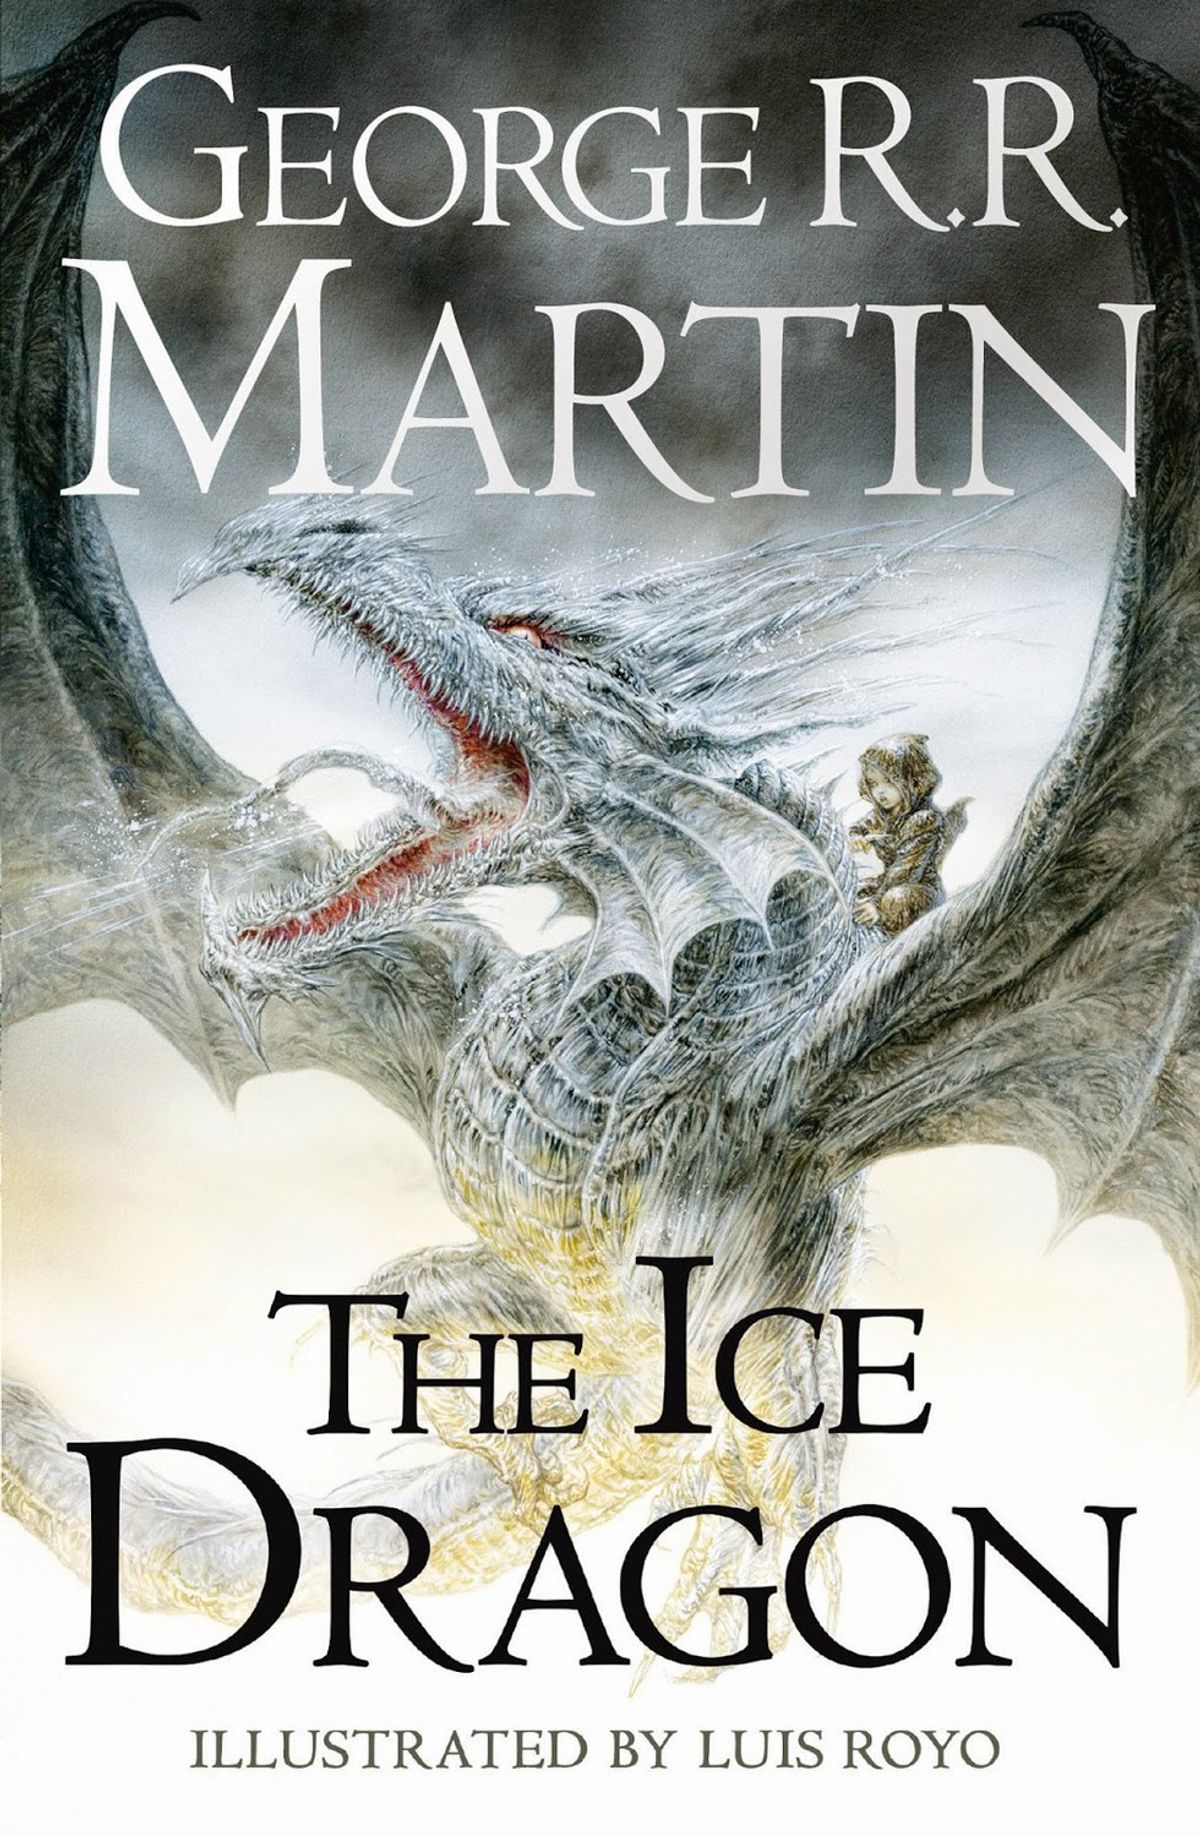 Book of the Week: 'The Ice Dragon' by George R.R. Martin